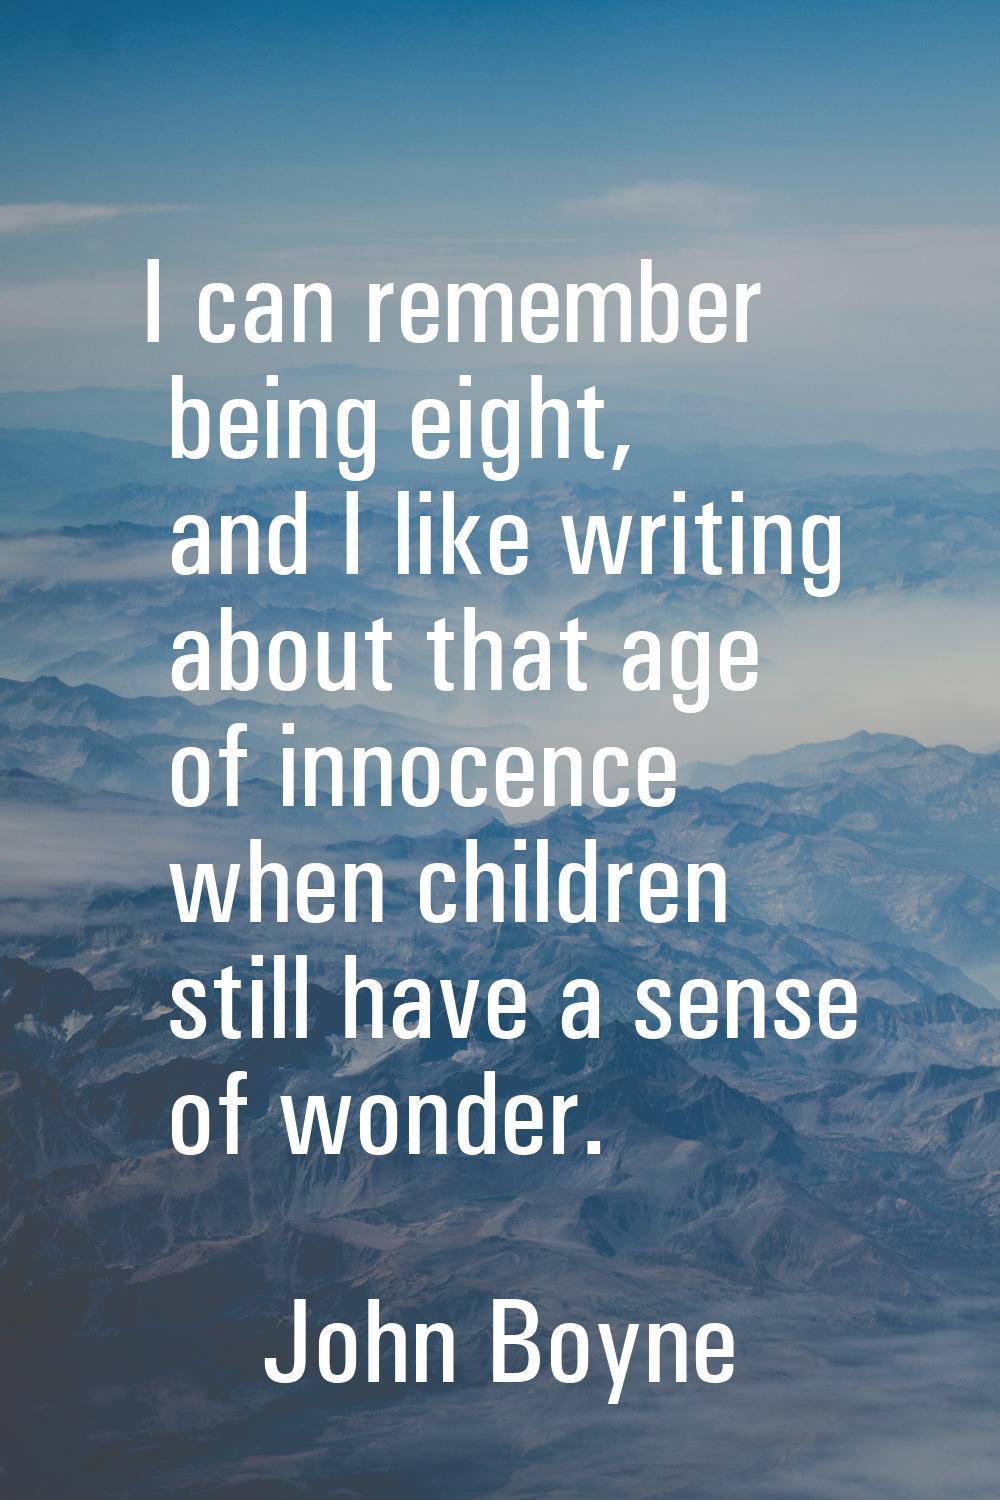 I can remember being eight, and I like writing about that age of innocence when children still have